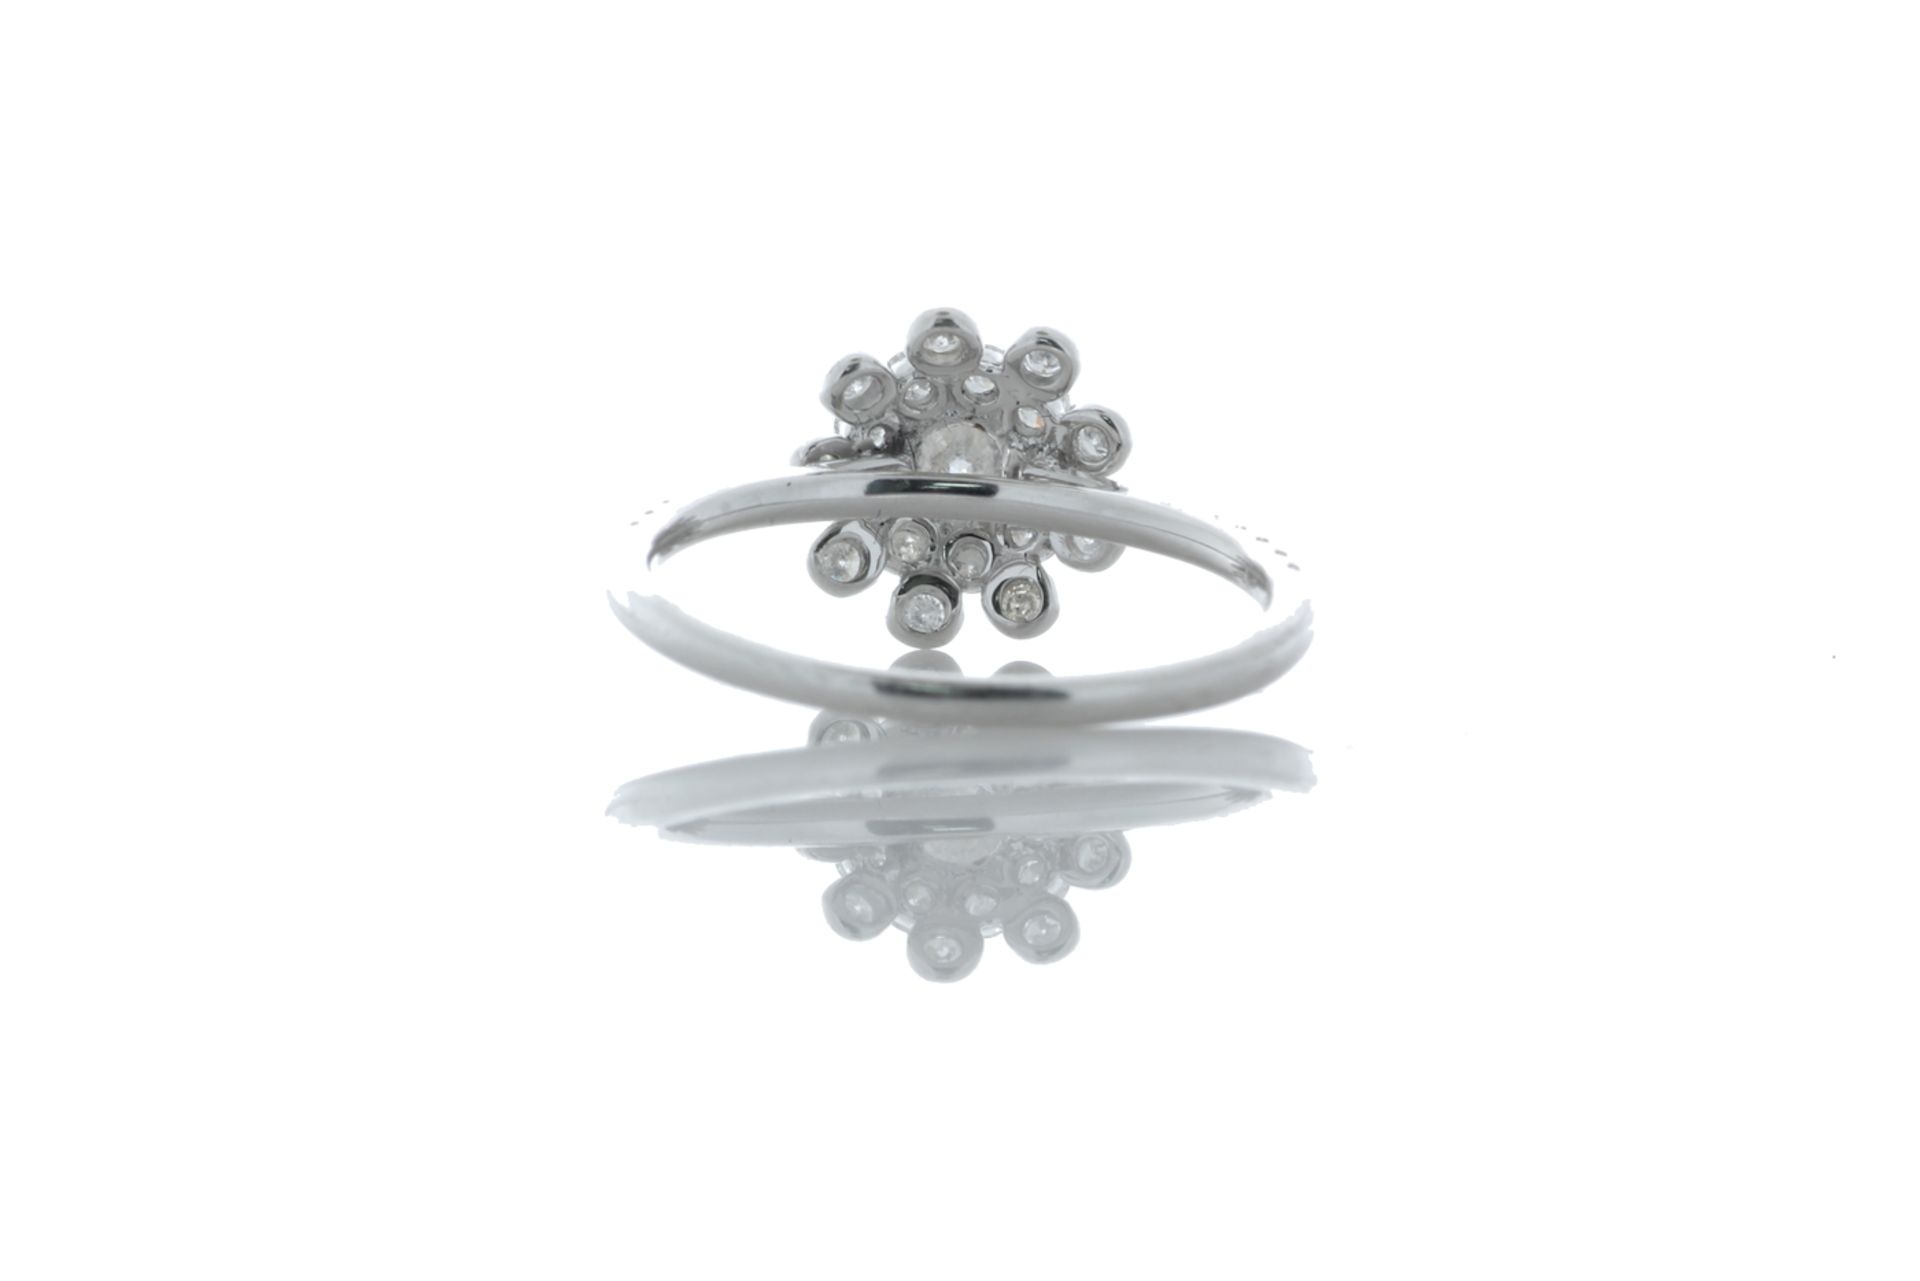 18ct White Gold Flower Halo Diamond Ring 0.76 Carats - Valued By GIE £6,415.00 - One natural round - Image 3 of 5